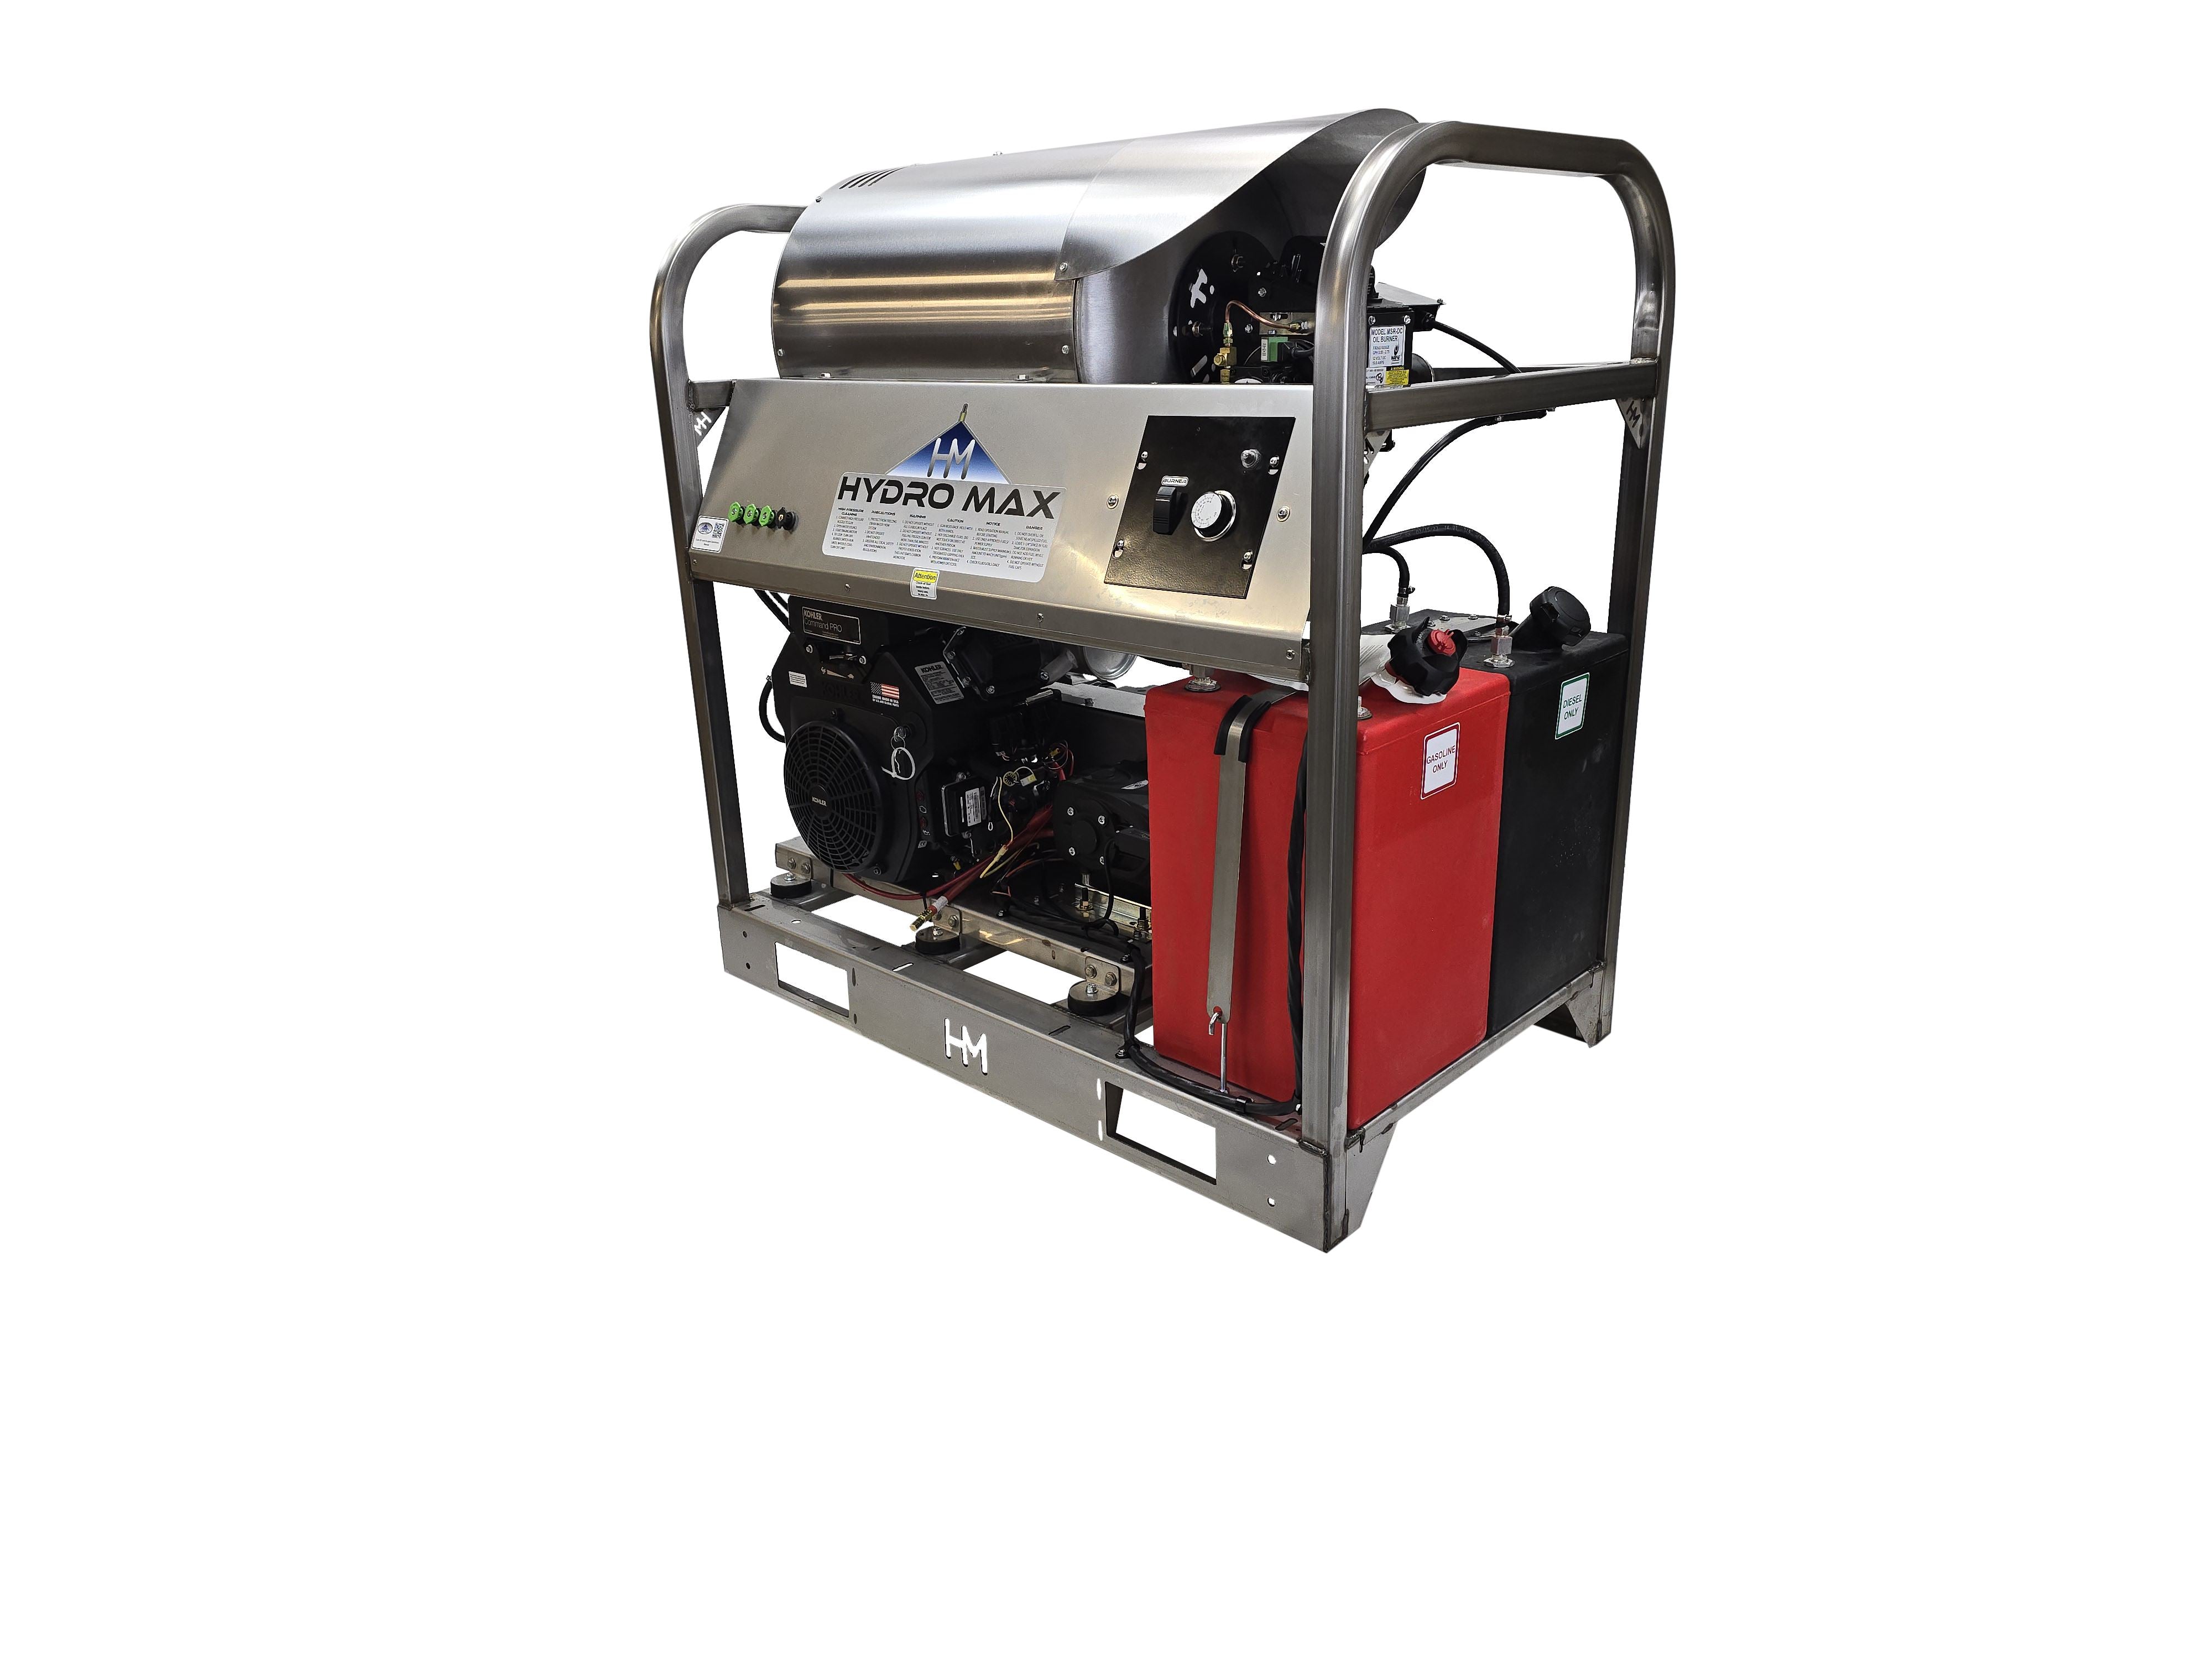 Hydro Max DC10035KGi- 9.8gpm @ 3500psi, Kohler 26.5HP(Fuel Injected Engine) Hot Water Pressure Washer Hydro Max 